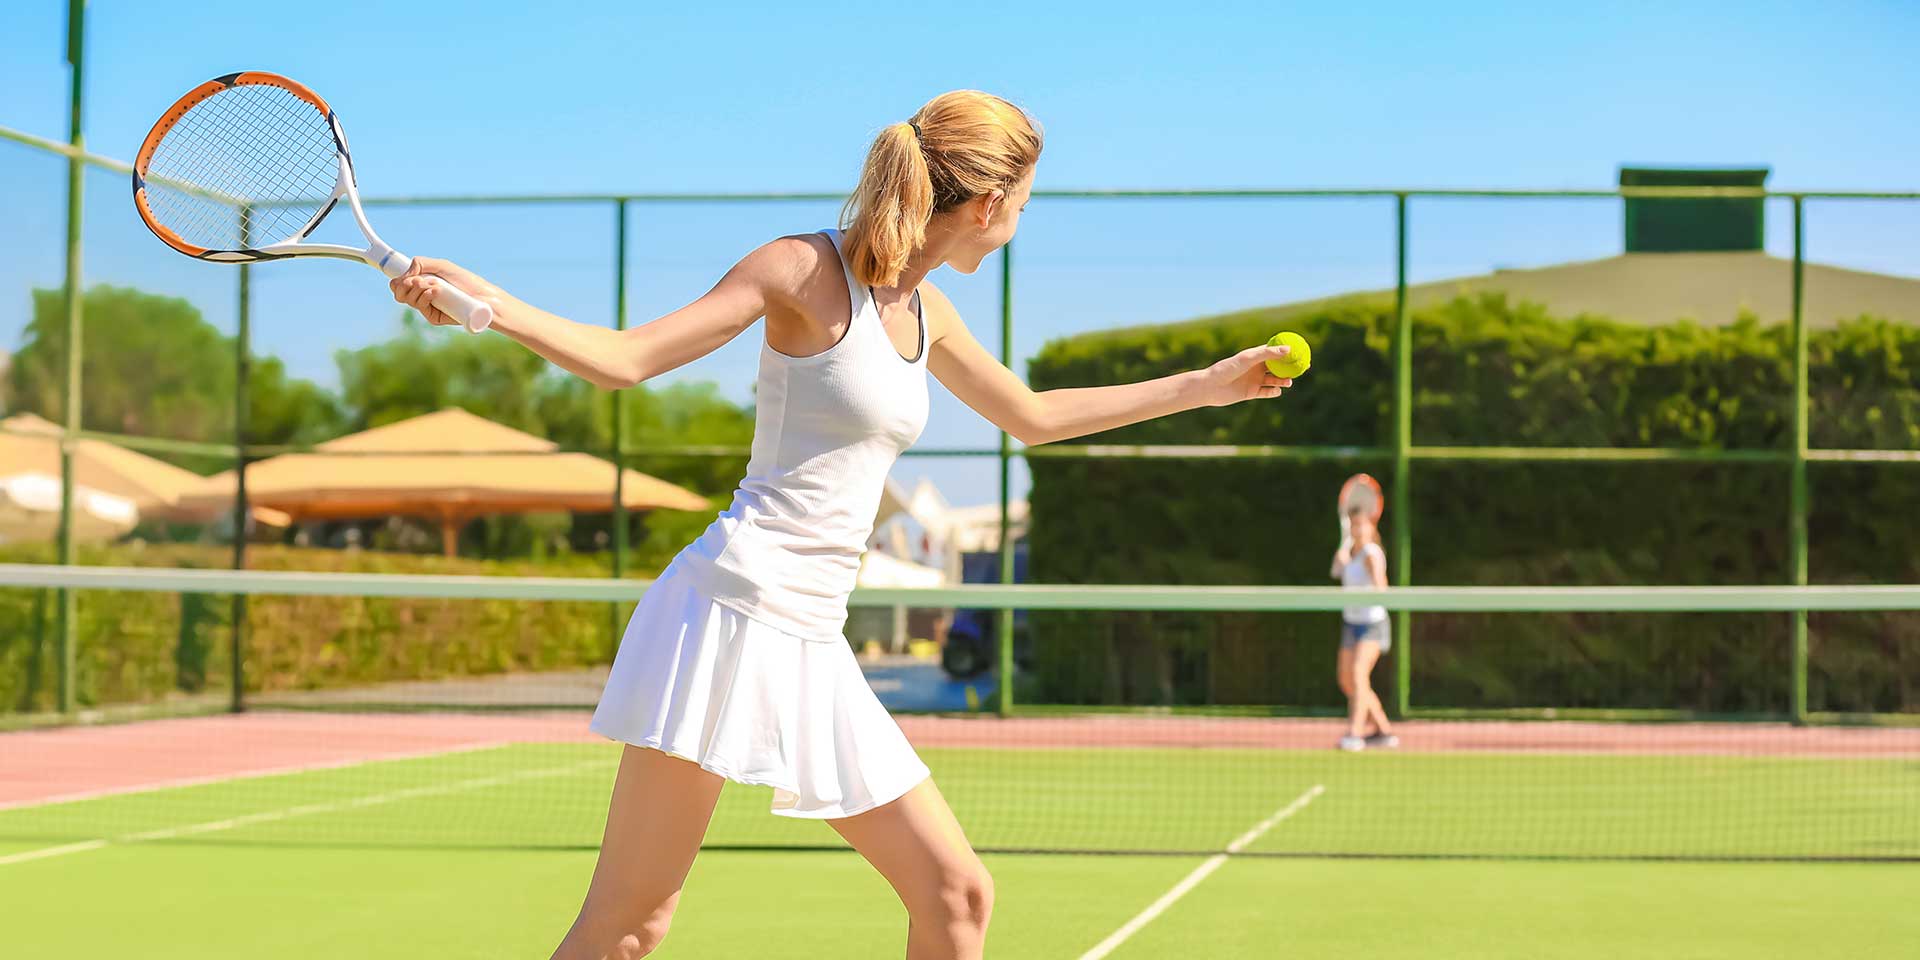 How to Style a Tennis Skort and Look Chic and Preppy on and off the Court